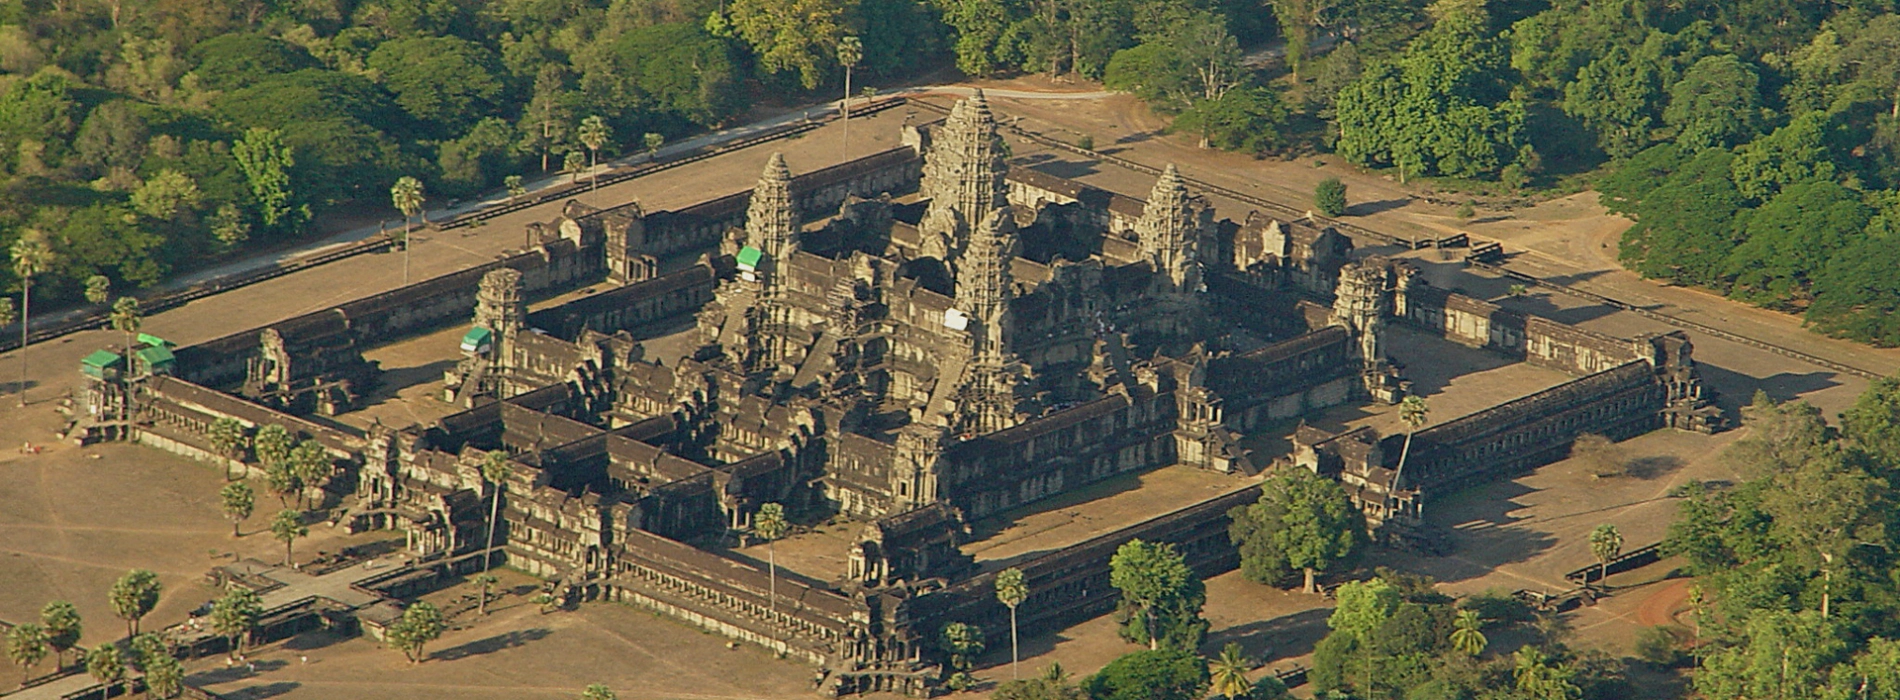 10+ Interesting Facts about Angkor Wat Temple Cambodia